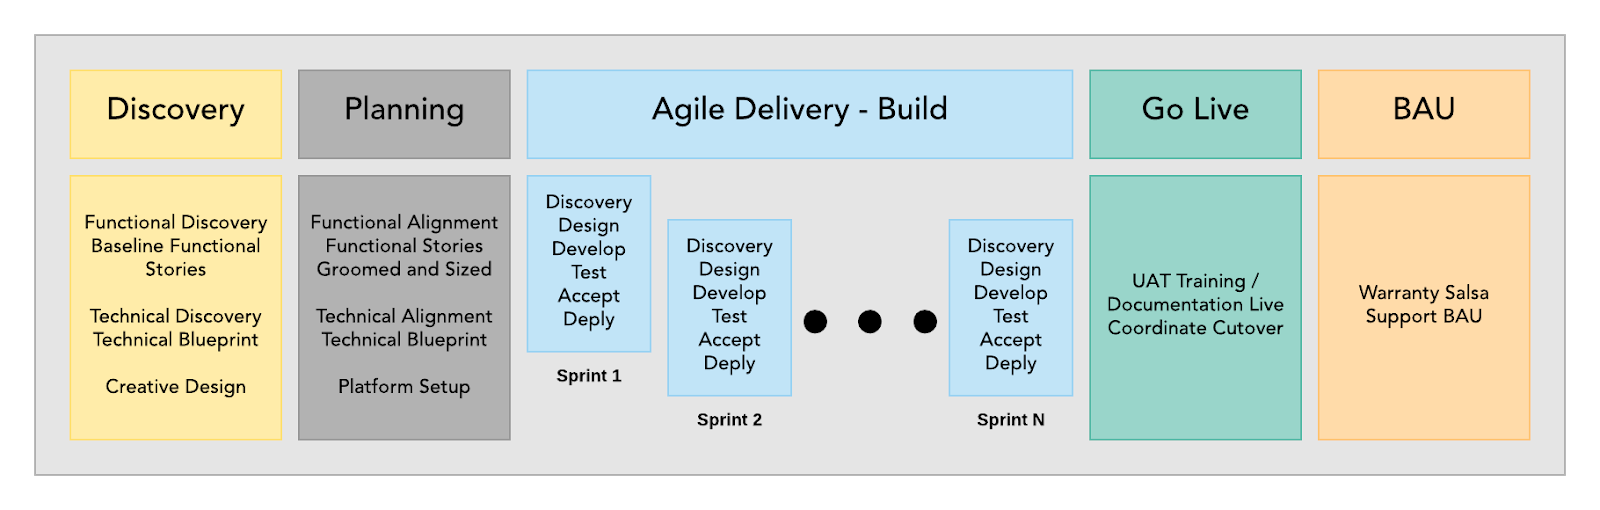 Delivering the second-generation GovCMS using agile